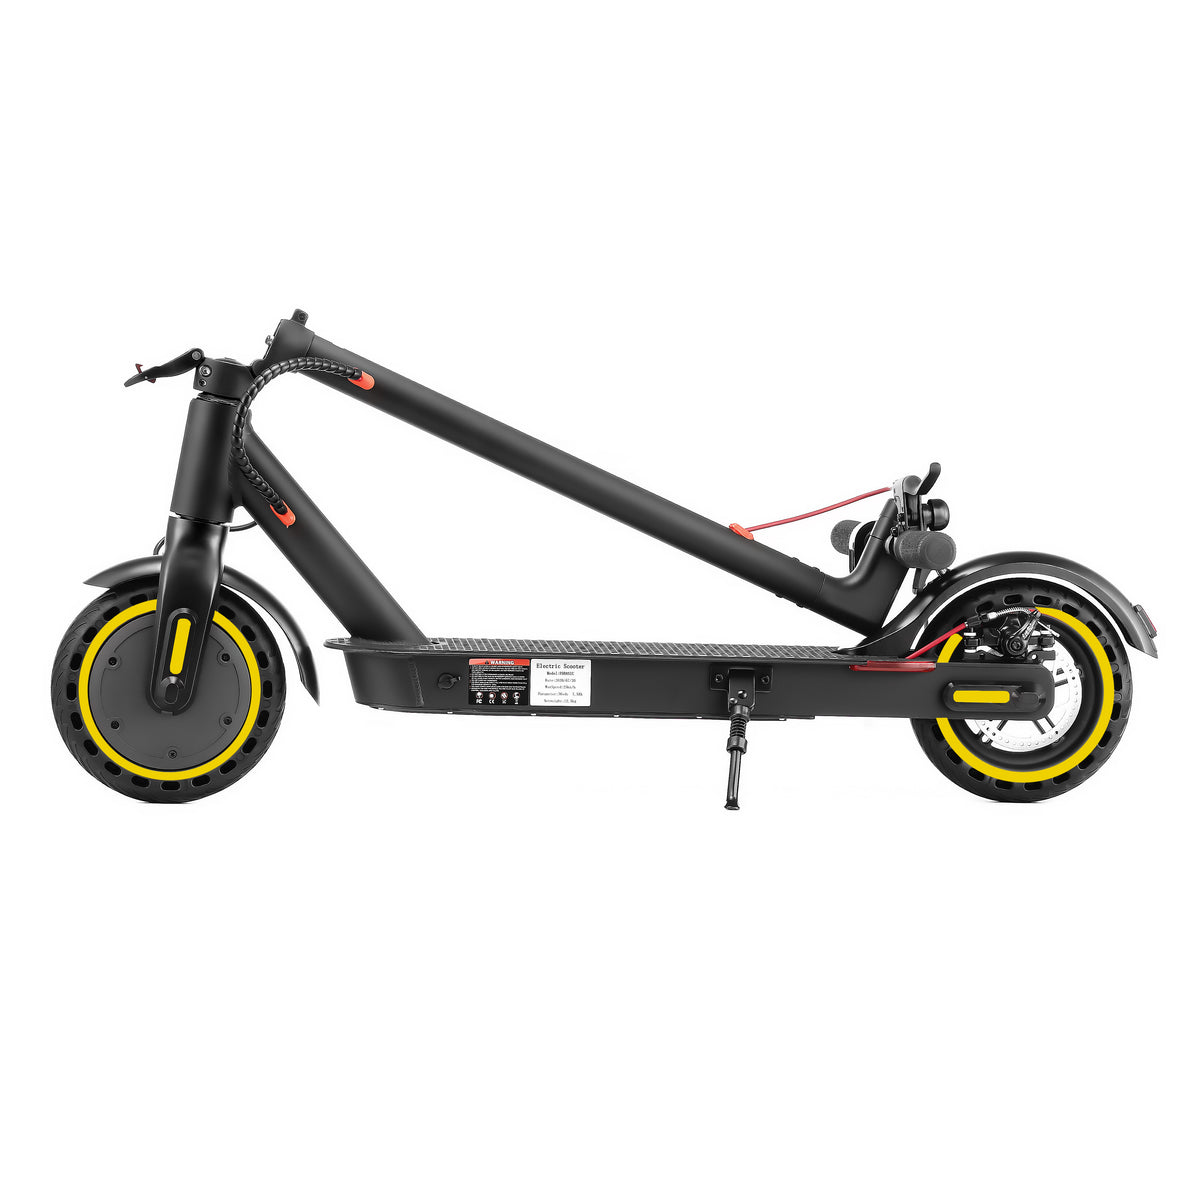 electric scooter, portable electric scooter, escooter, electric folding scooter, ebike, kids electric scooter, affordable electric scooter, cheap escooter